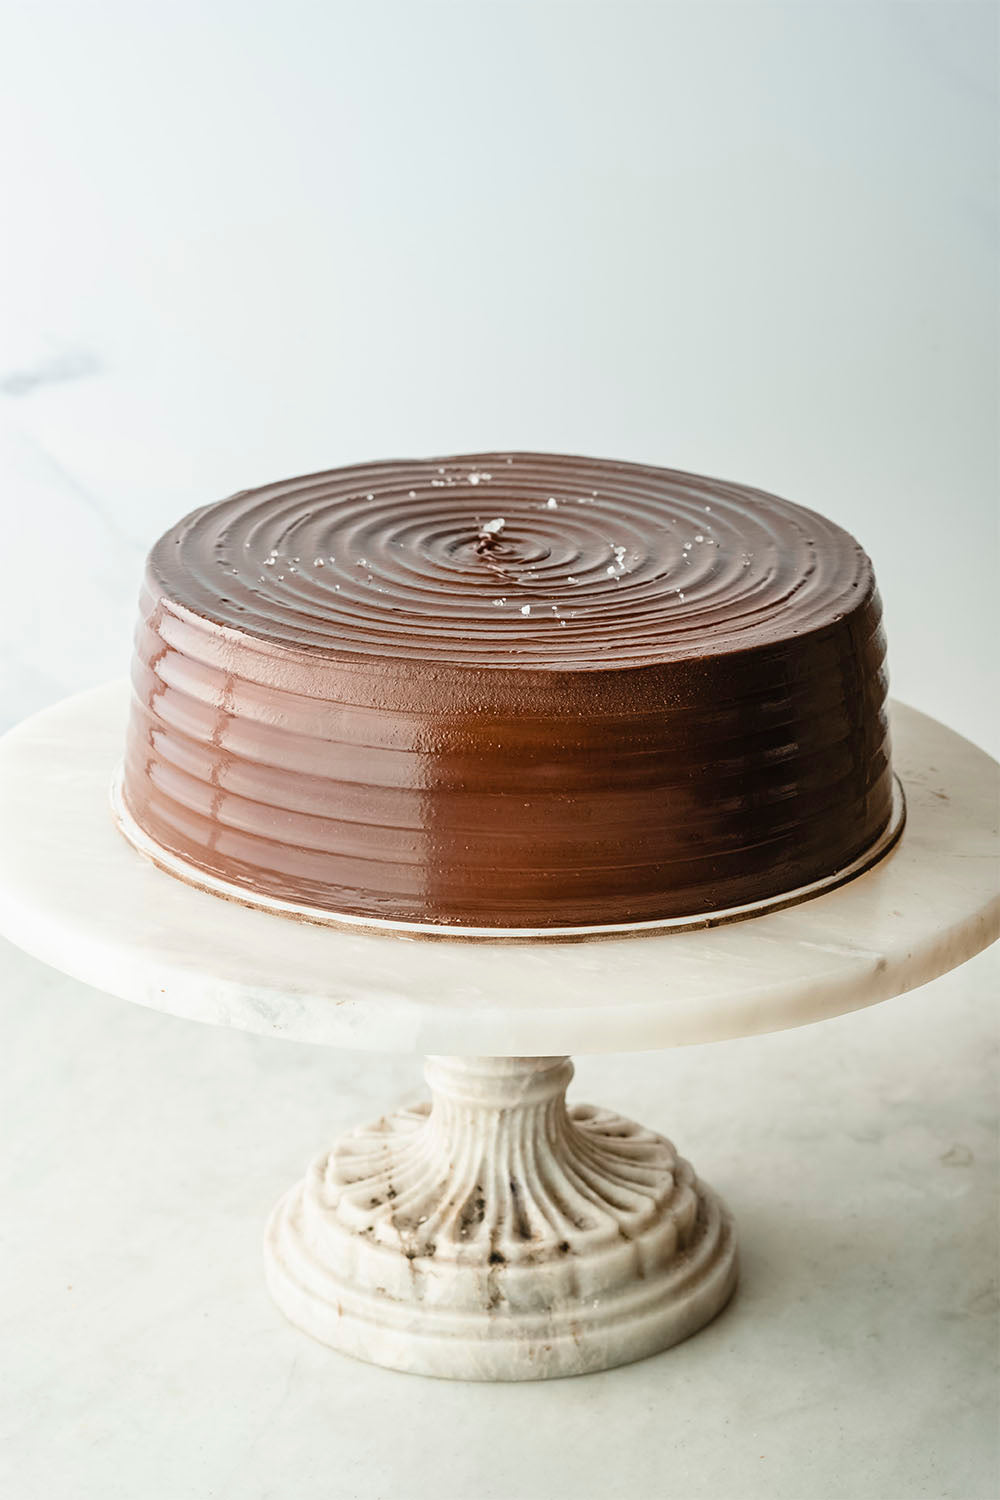 Whole Salted Chocolate Cake with Caramel dessert or pastry